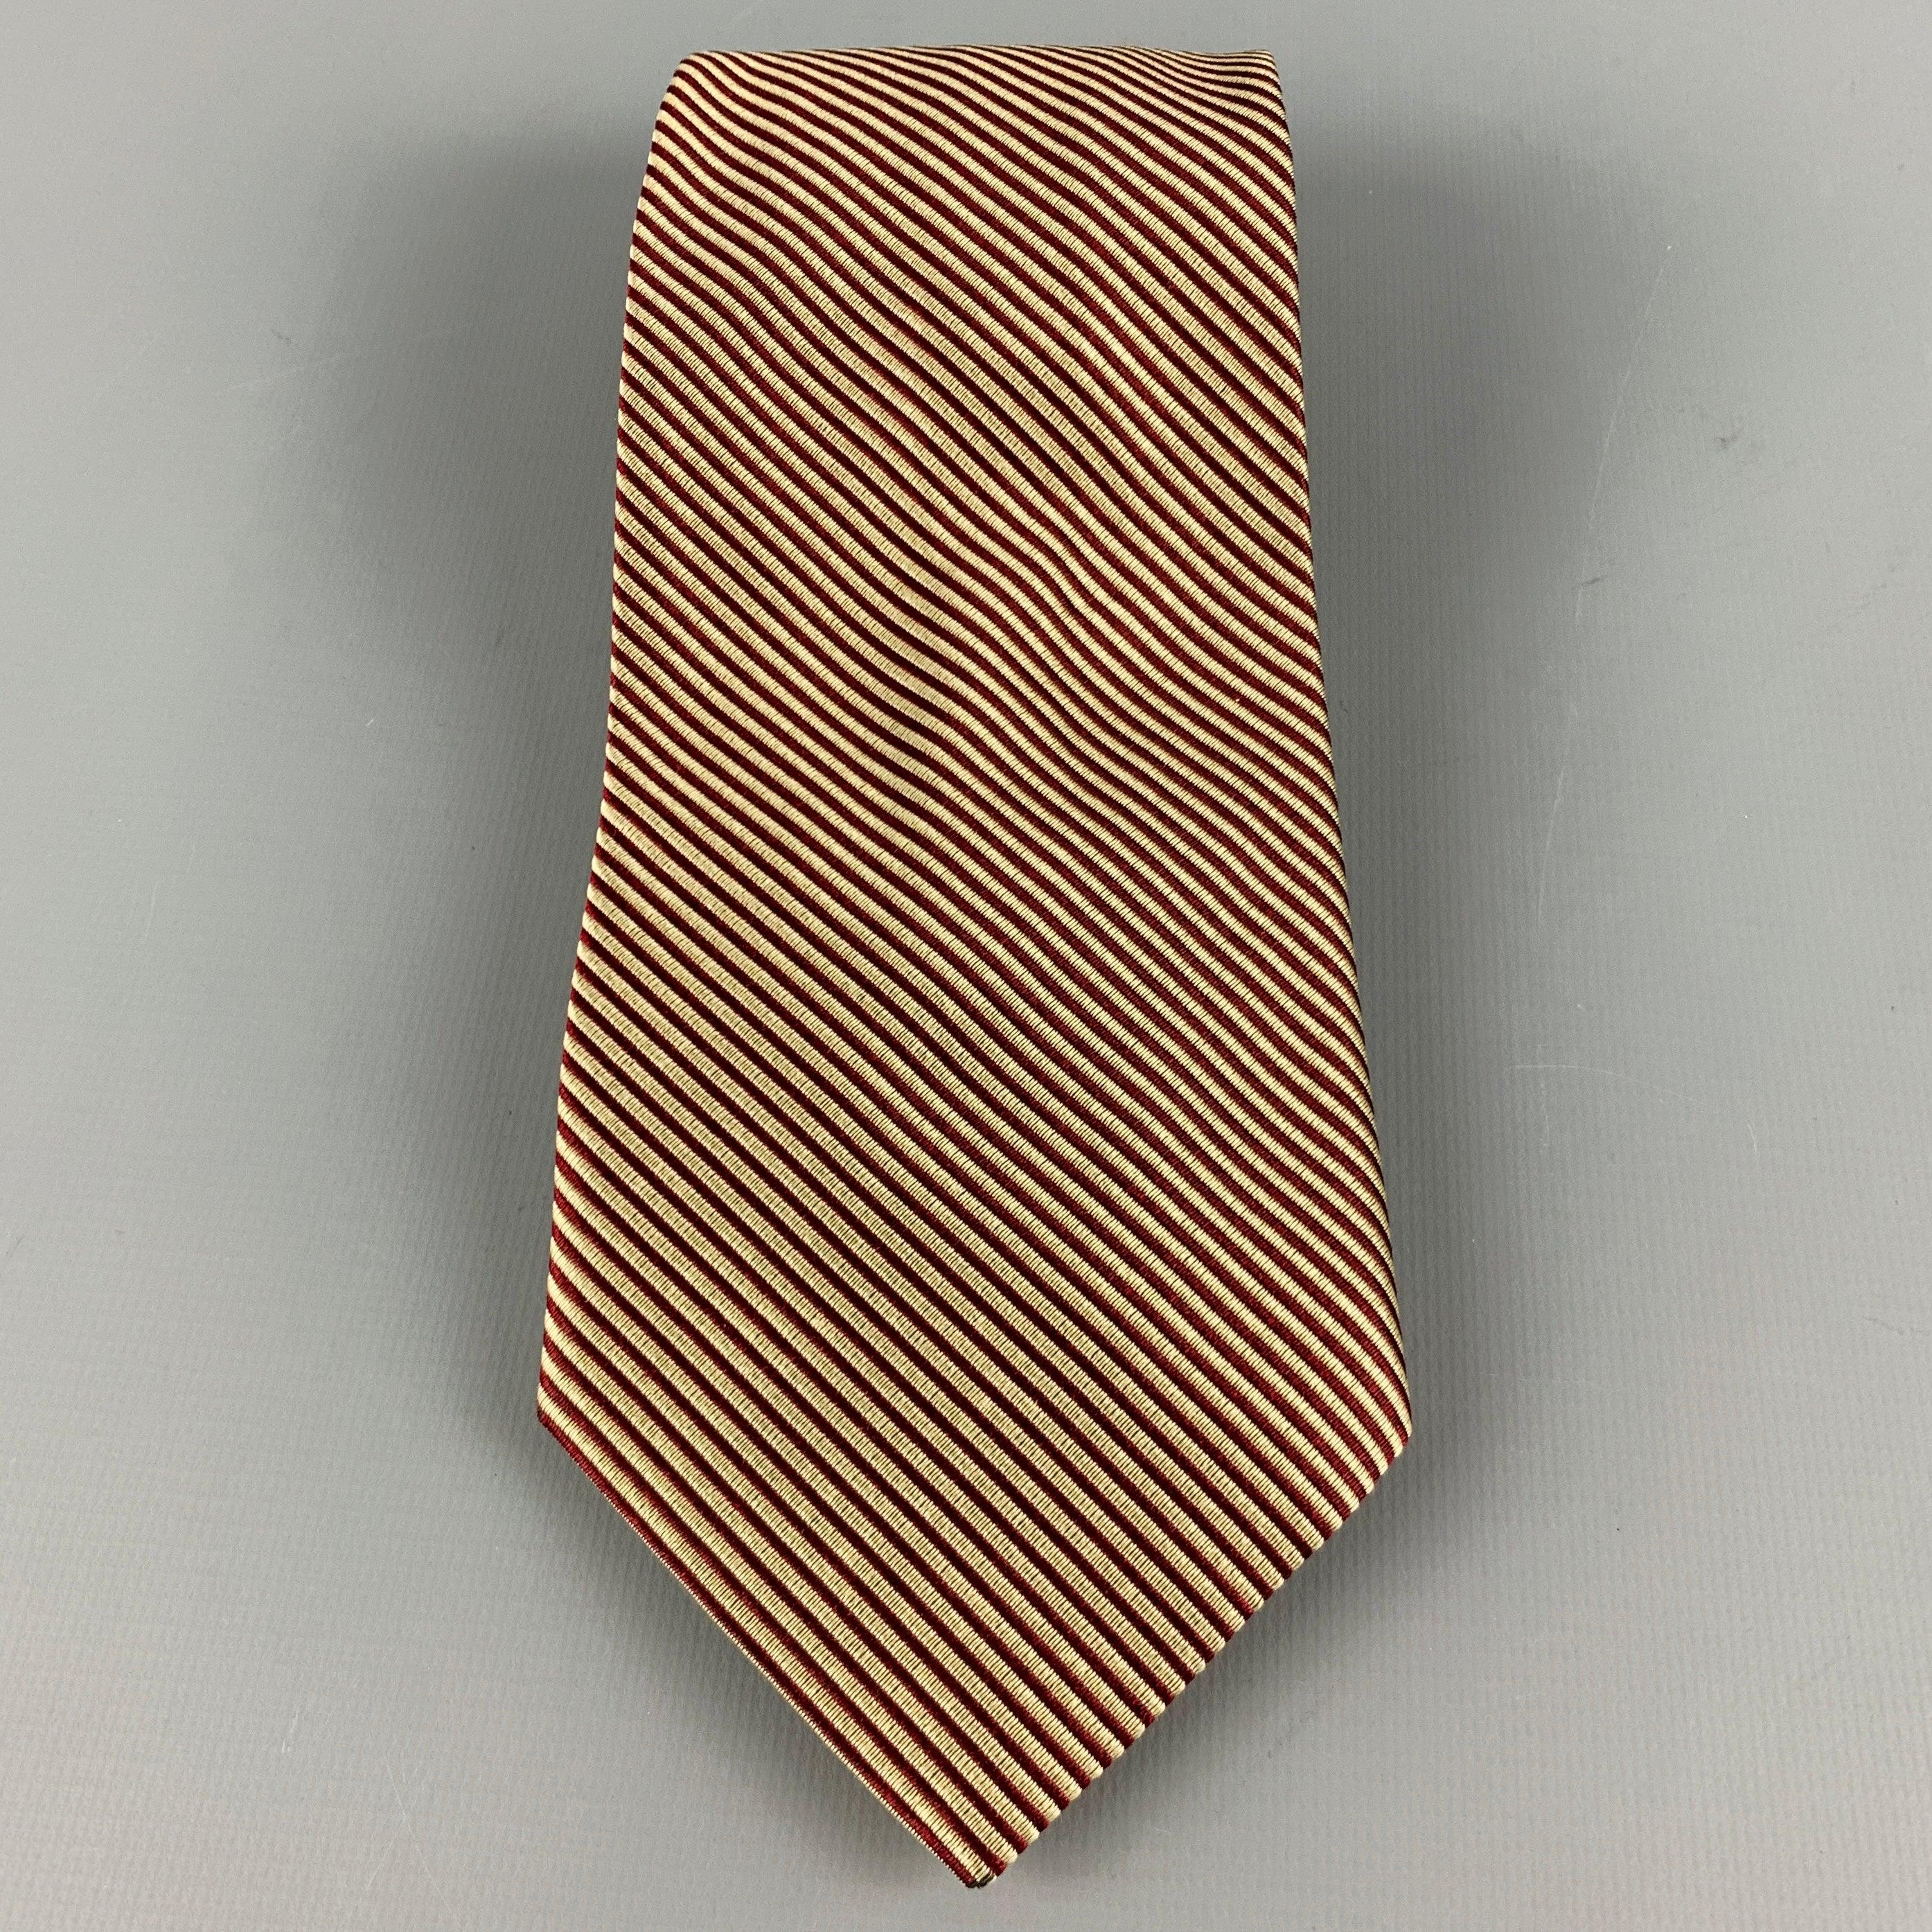 FENDI
necktie in a burgundy and gold silk jacquard featuring a diagonal stripe pattern. Handmade in Italy.Excellent Pre-Owned Condition. 

Measurements: 
  Width: 3.5 inches Length: 56 inches 
  
  
 
Reference No.: 128759
Category: Tie
More